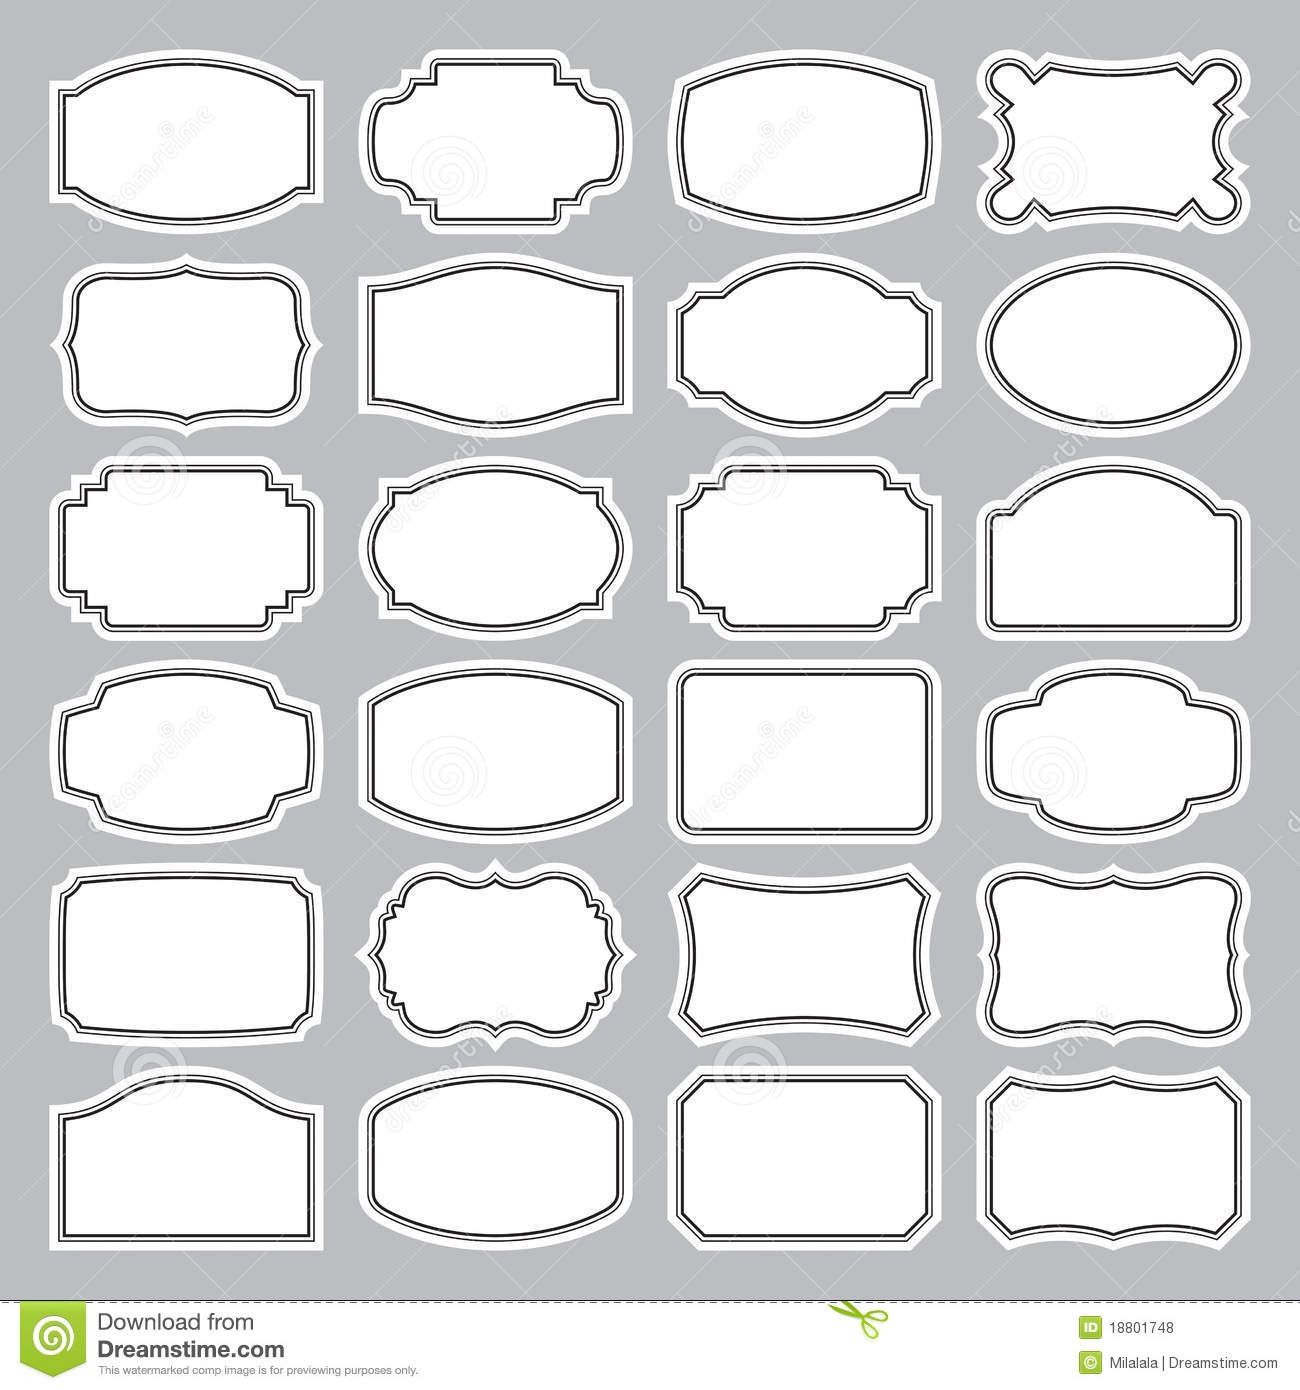 15 Blank Label Vector Images - Free Printable Blank Labels, Blank - Fancy Labels Printable Free